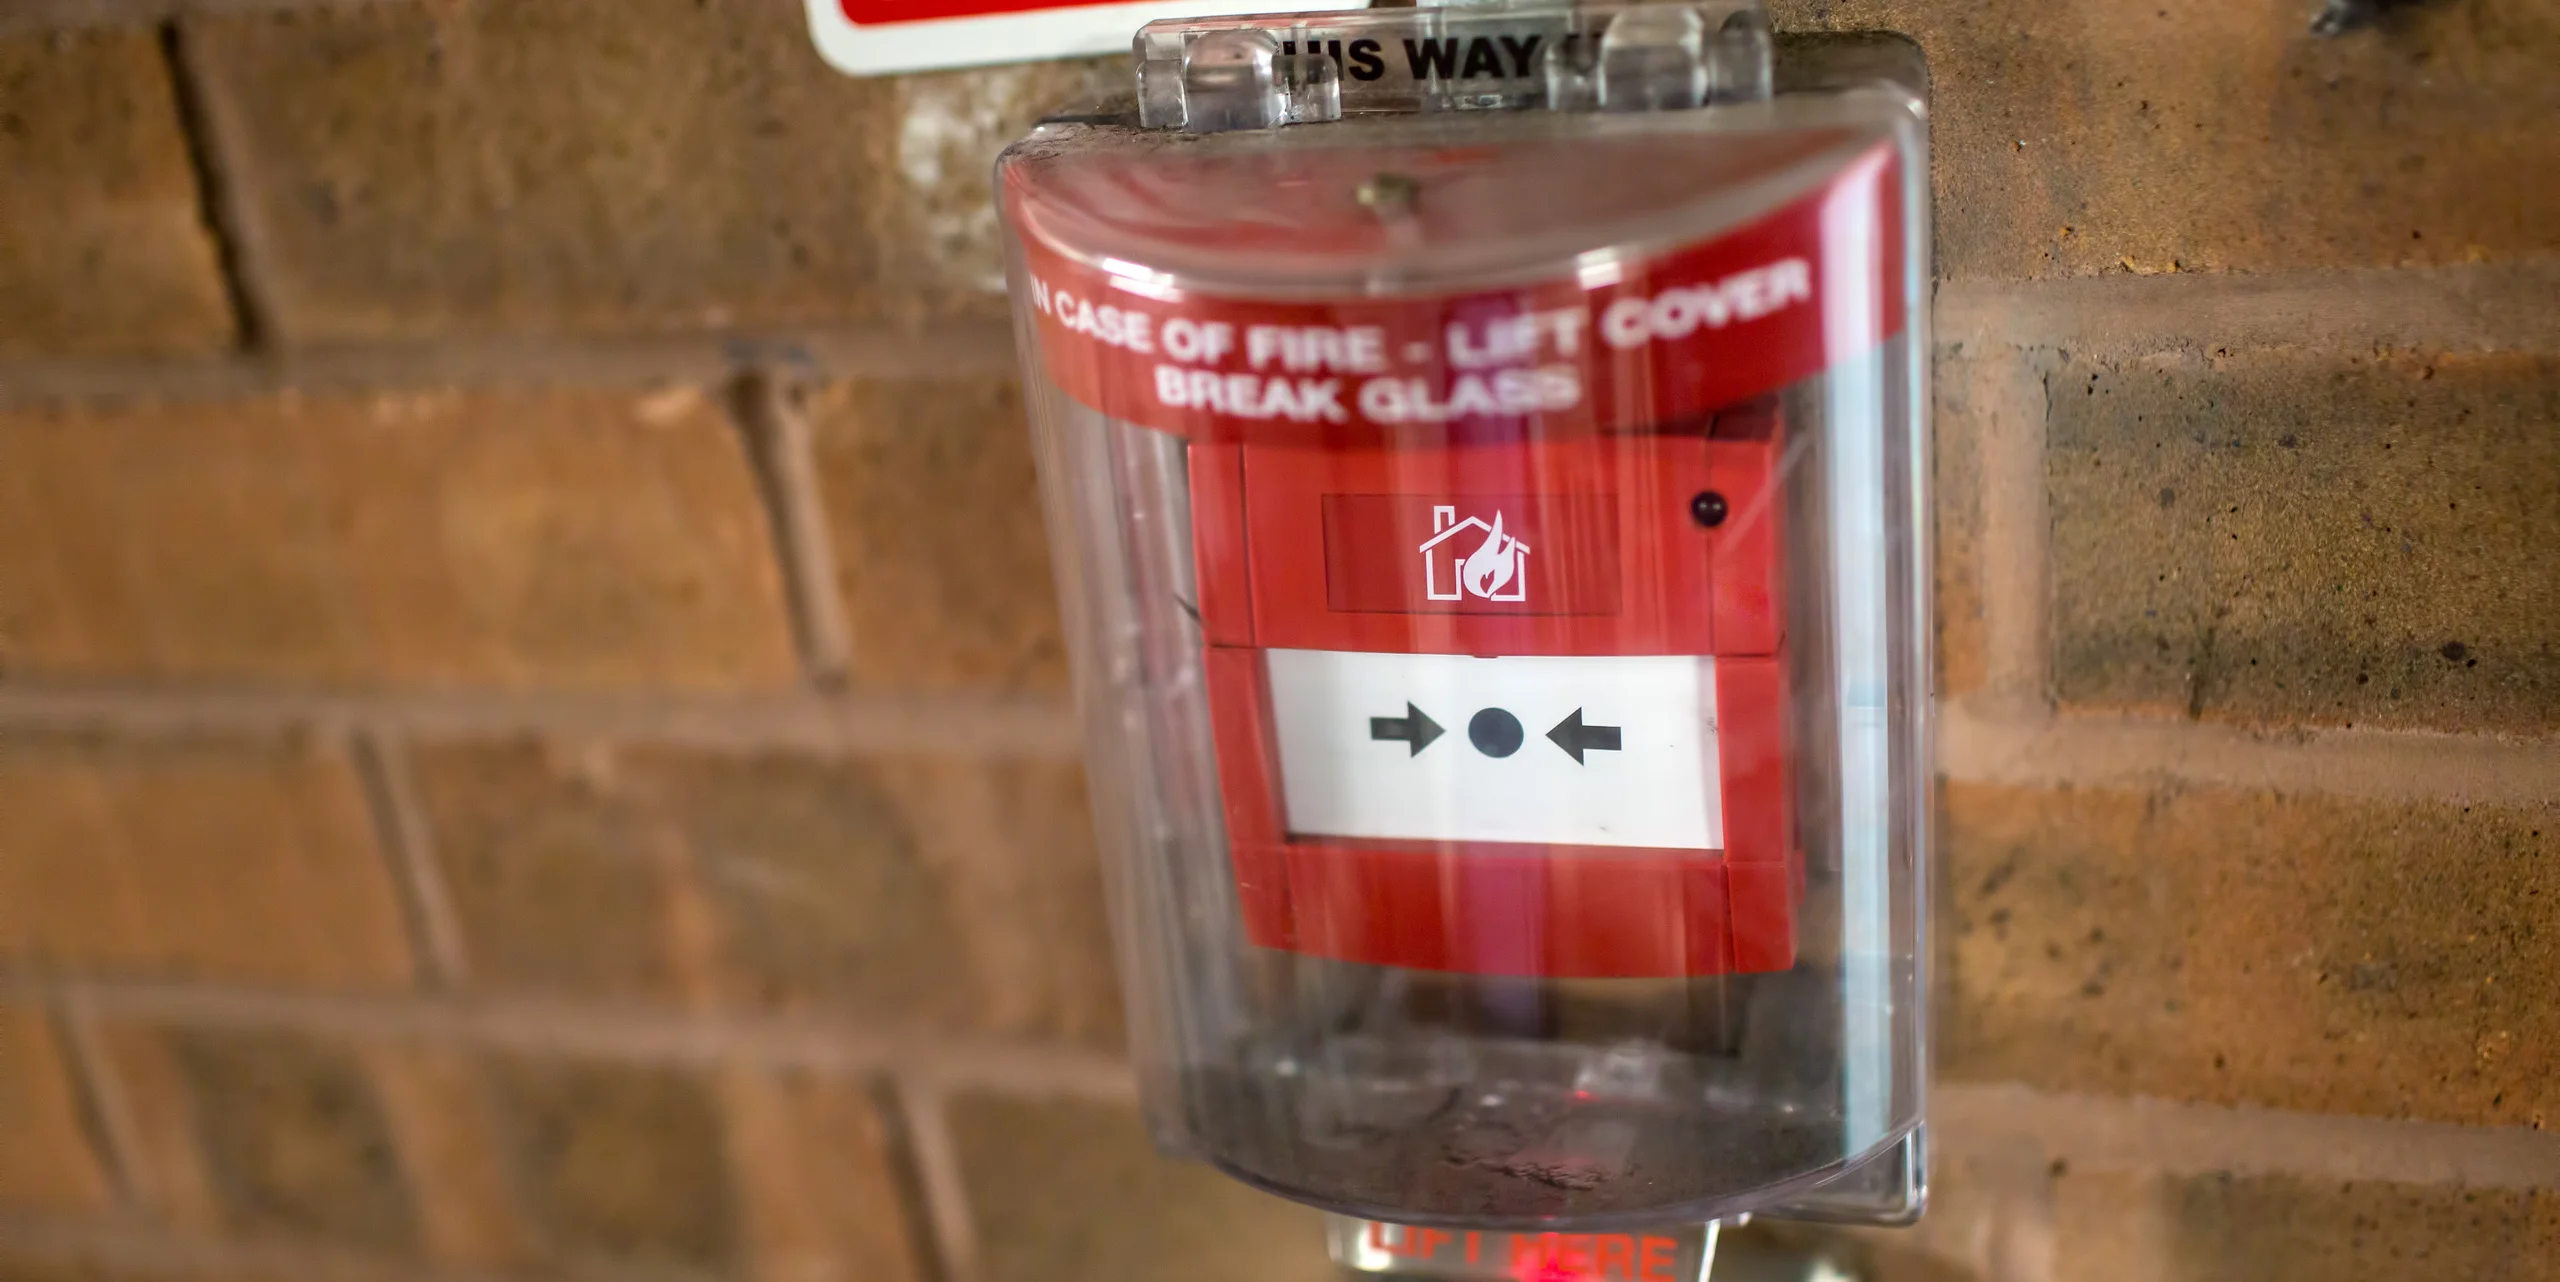 PES fire alarm systems